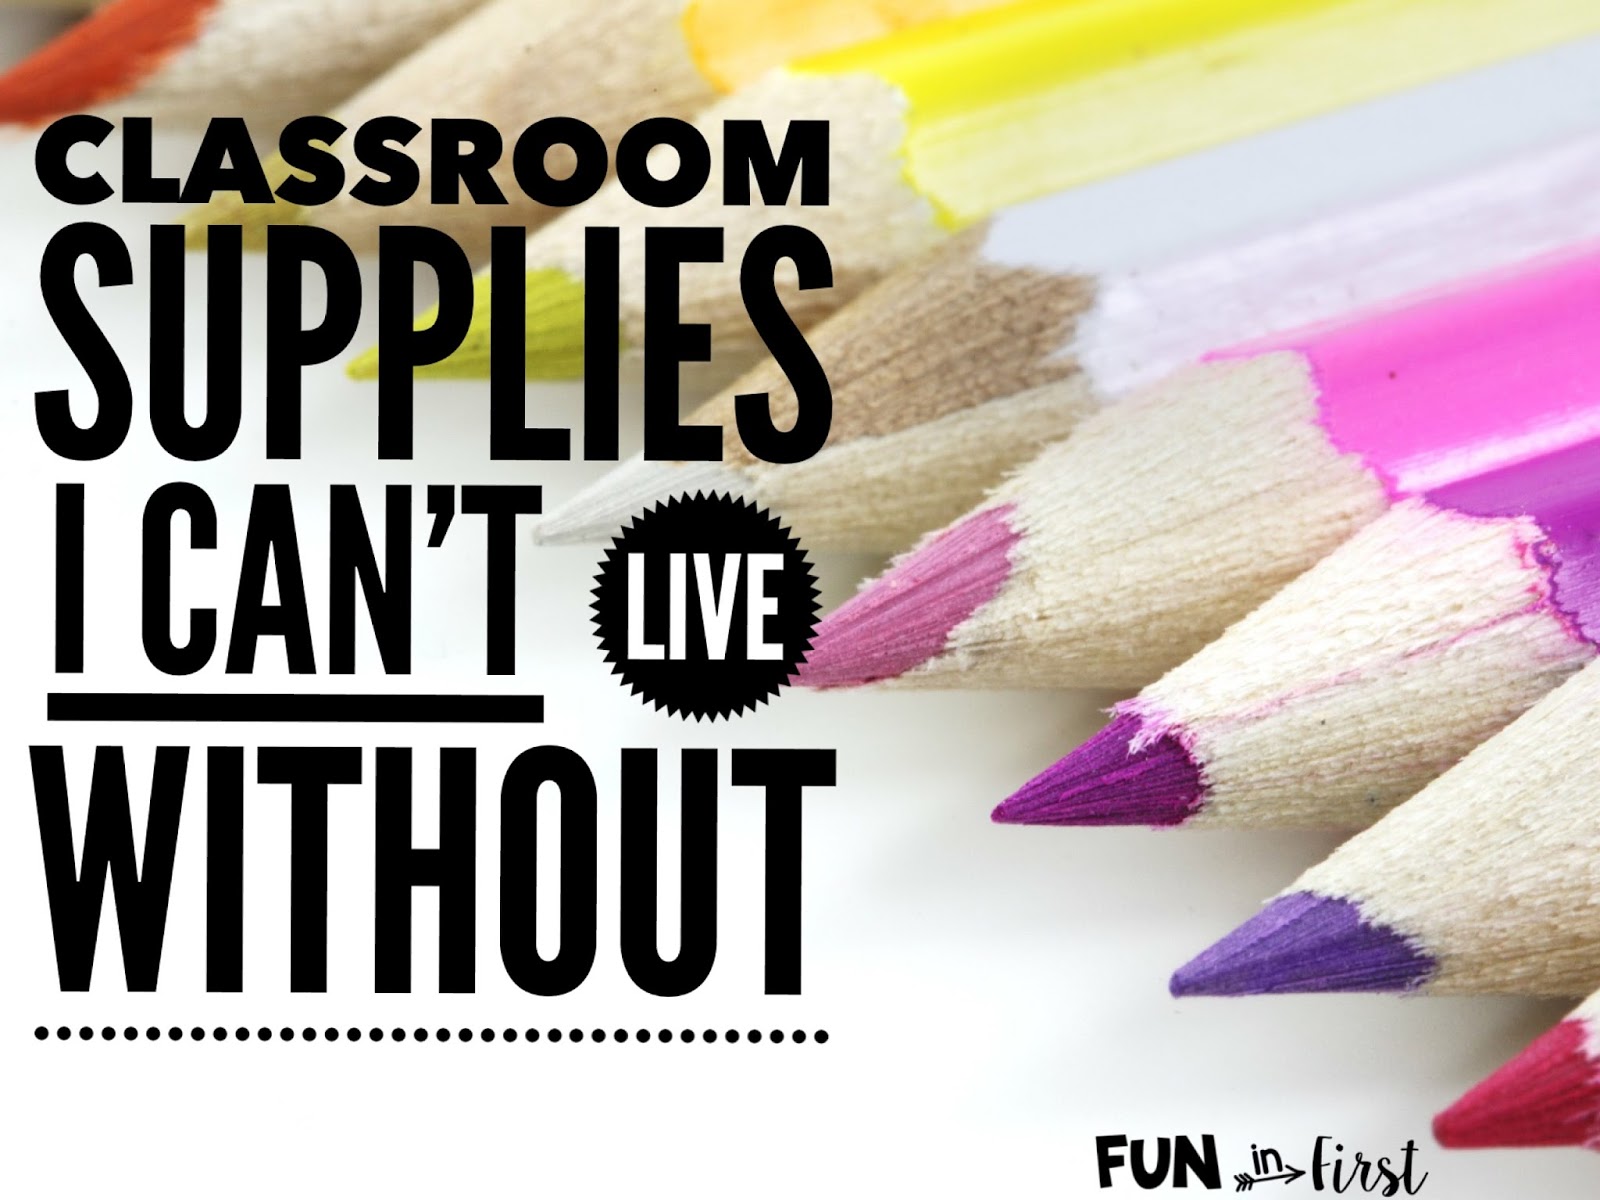 Walmart is Selling Crayola Classroom Sets for Teachers for Under $15 Kids  Activities Blog